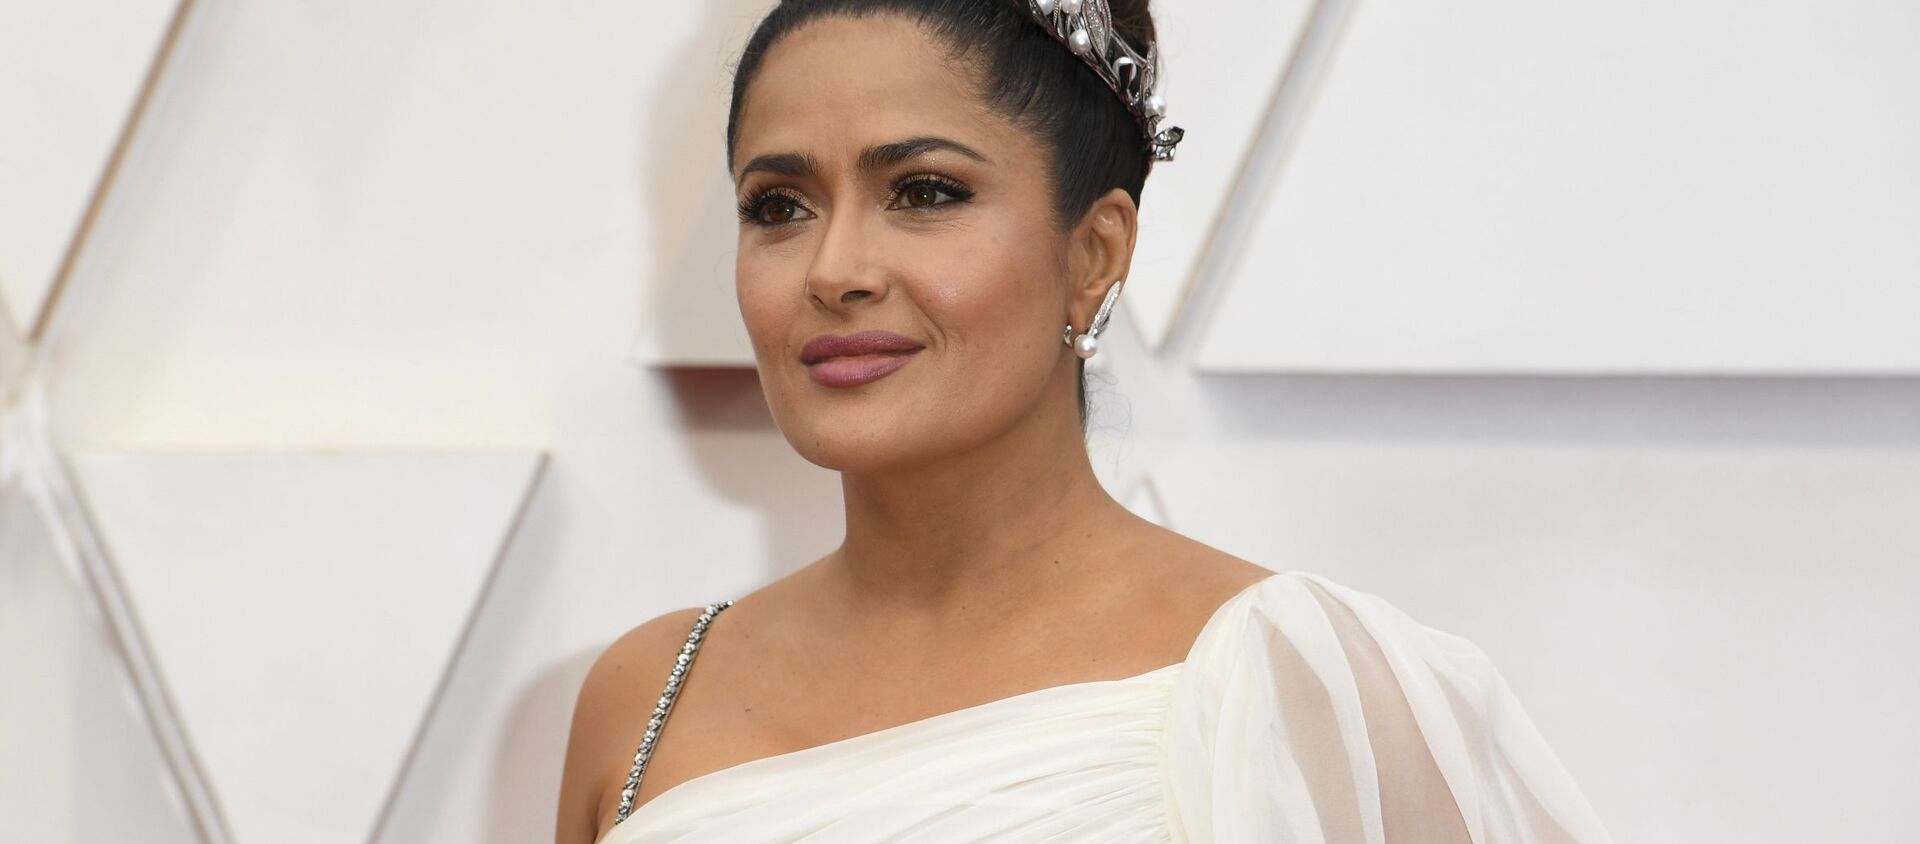 Salma Hayek arrives at the Oscars on Sunday, Feb. 9, 2020, at the Dolby Theatre in Los Angeles - Sputnik International, 1920